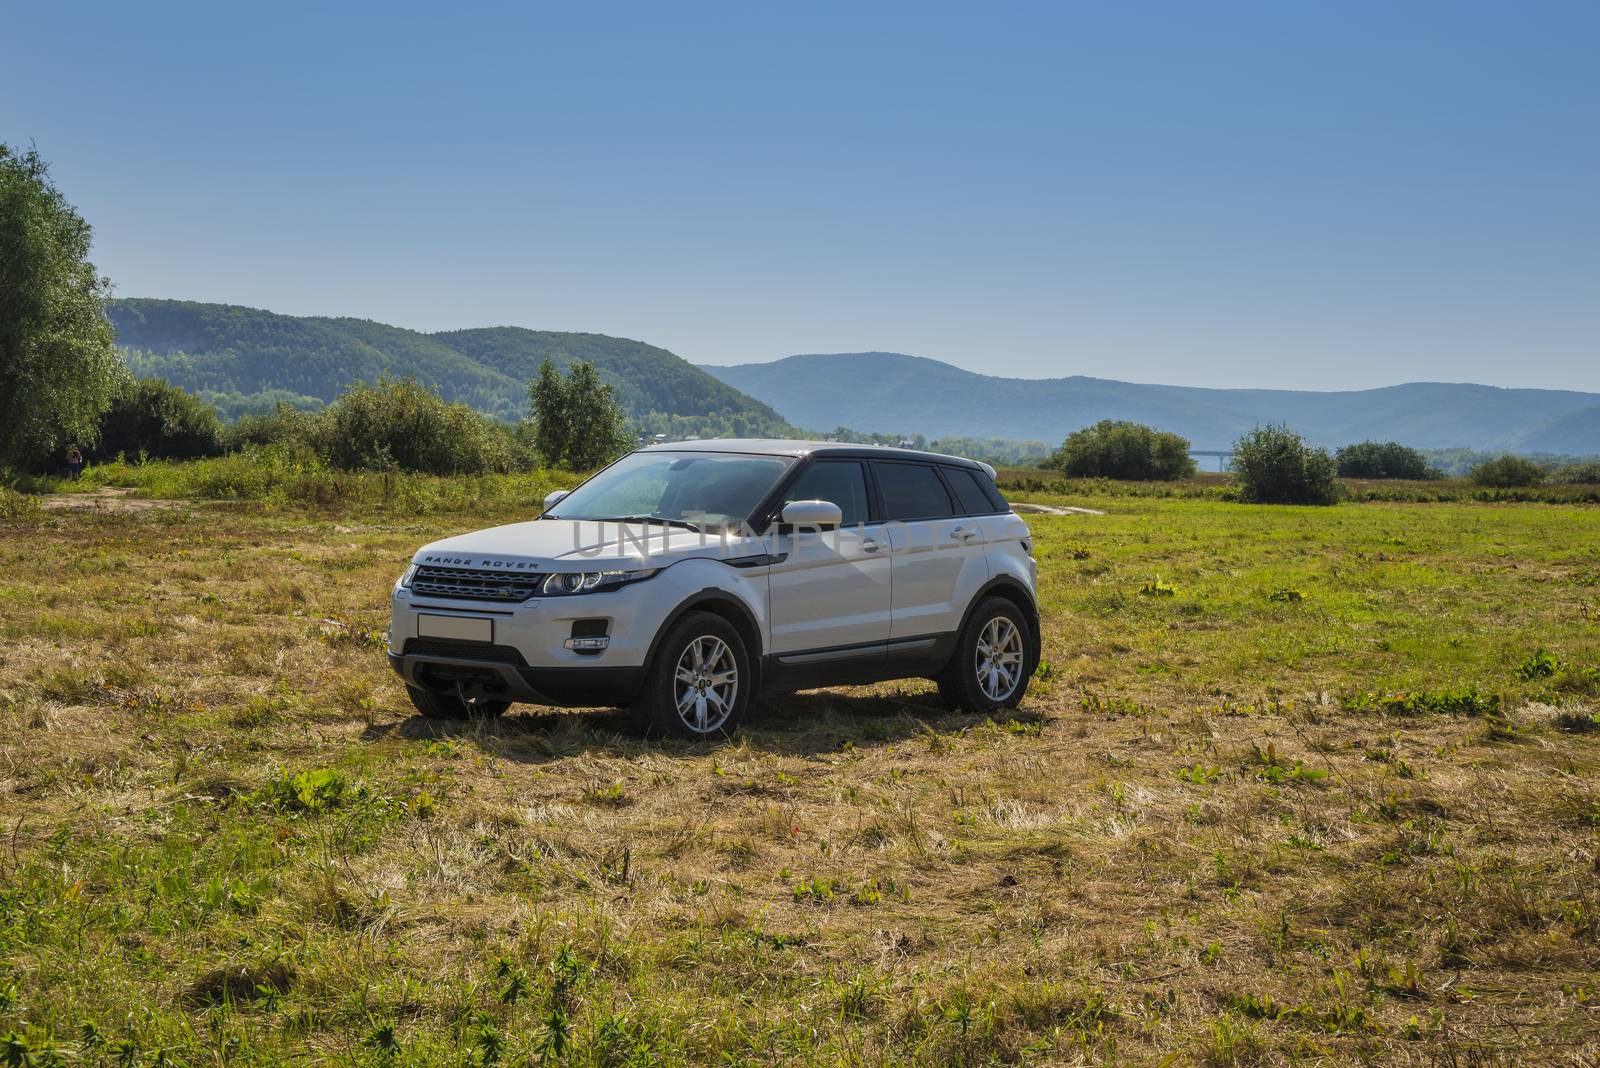 Car Land Rover Range Rover is in the field on a Sunny autumn day near the city of Samara, Russia. August 1, 2018.